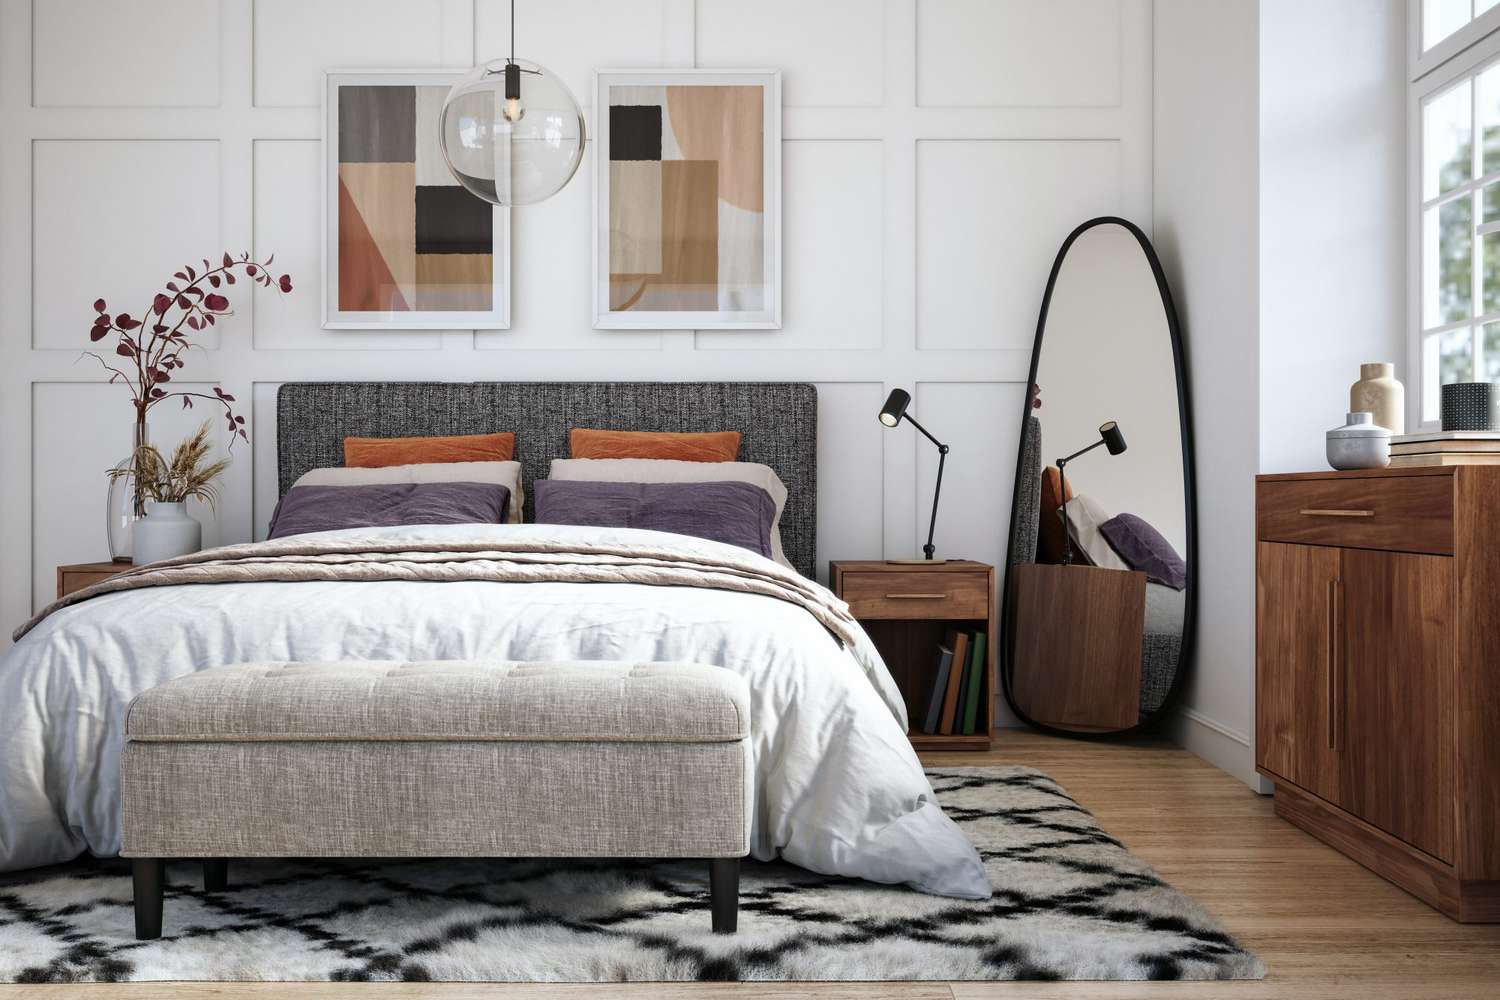 Choosing The Perfect Area Rug for Under A Queen Size Bed